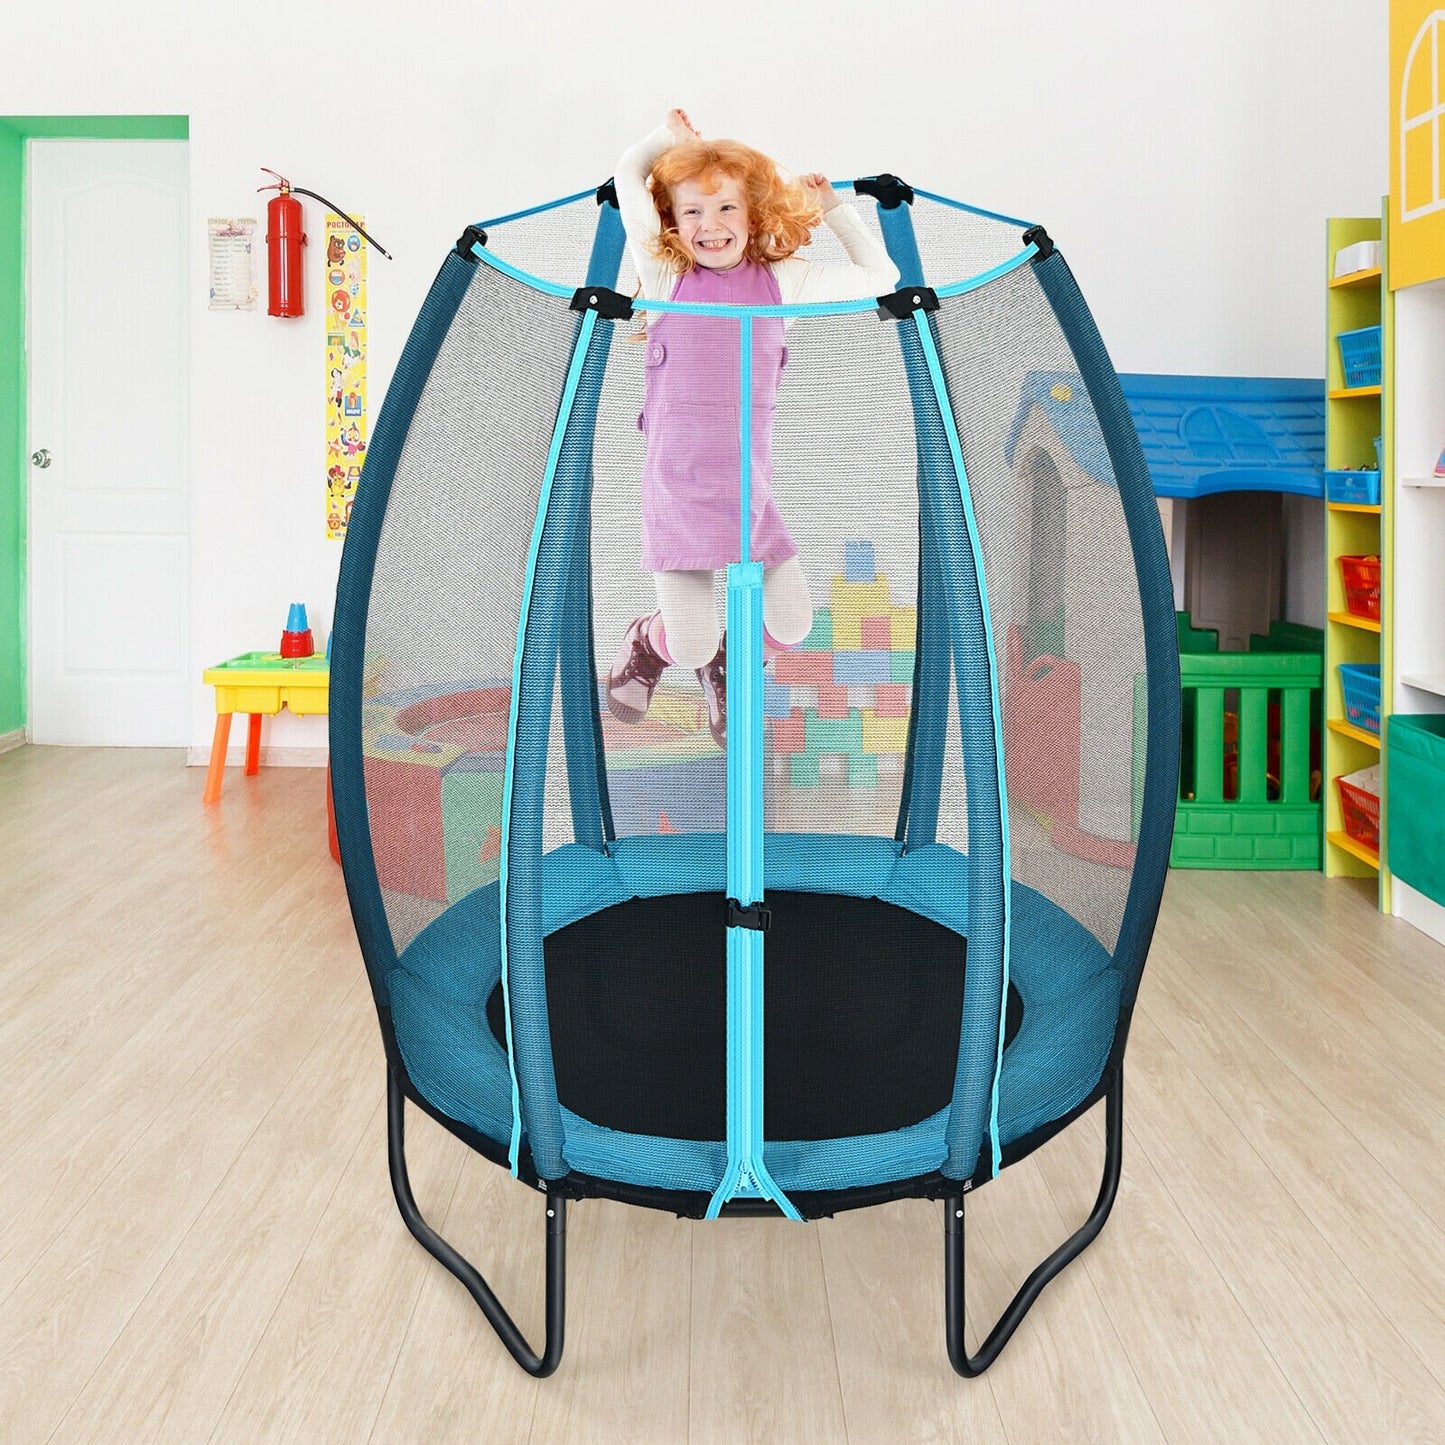 4 Feet Kids Trampoline Recreational Bounce Jumper with Enclosure Net, Blue at Gallery Canada